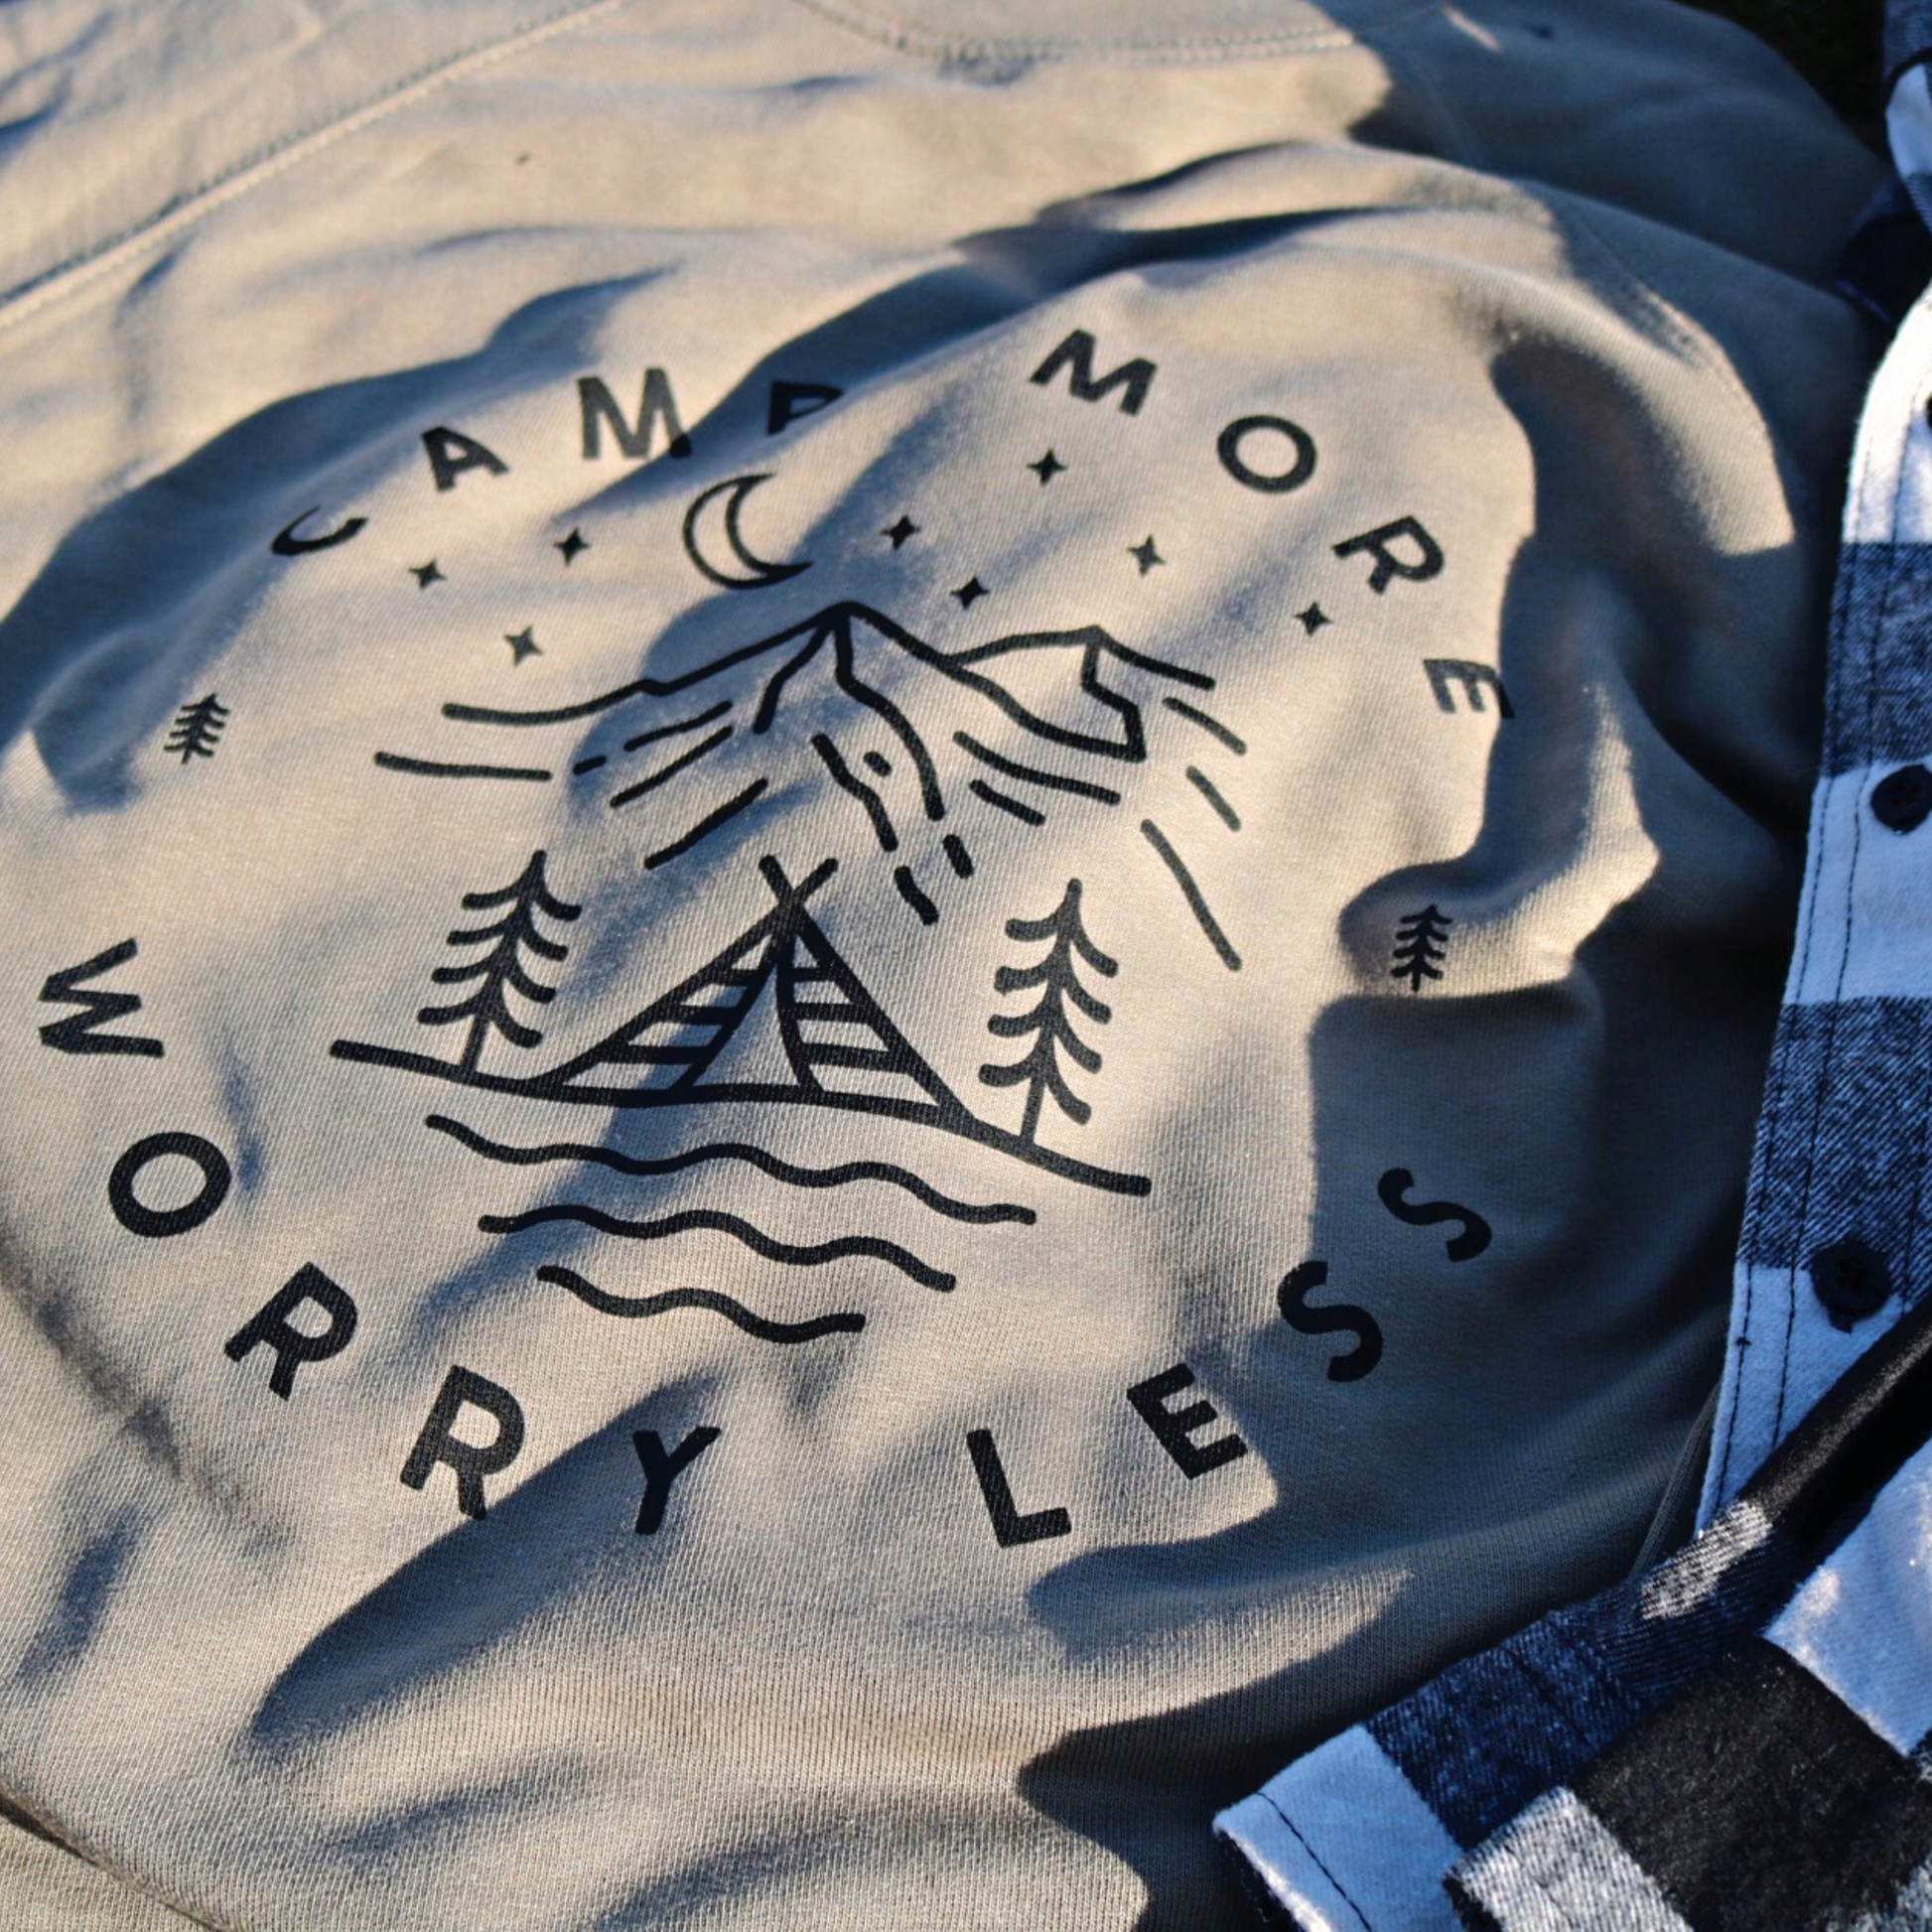 Camp More Worry Less - Pull Over Sweatshirt. Design has "camp more" on top & "worry less" on the bottom curved in a circle with small pine trees separating the words. In the middle includes a tent siting on a bay of water with pine trees standing on both sides of the tent, with mountains in the background and stars aligning with a moon above the mountains. The design is in black on an olive green blank. This is the front and up close view of the sweatshirt, with a black and white flannel next to it.